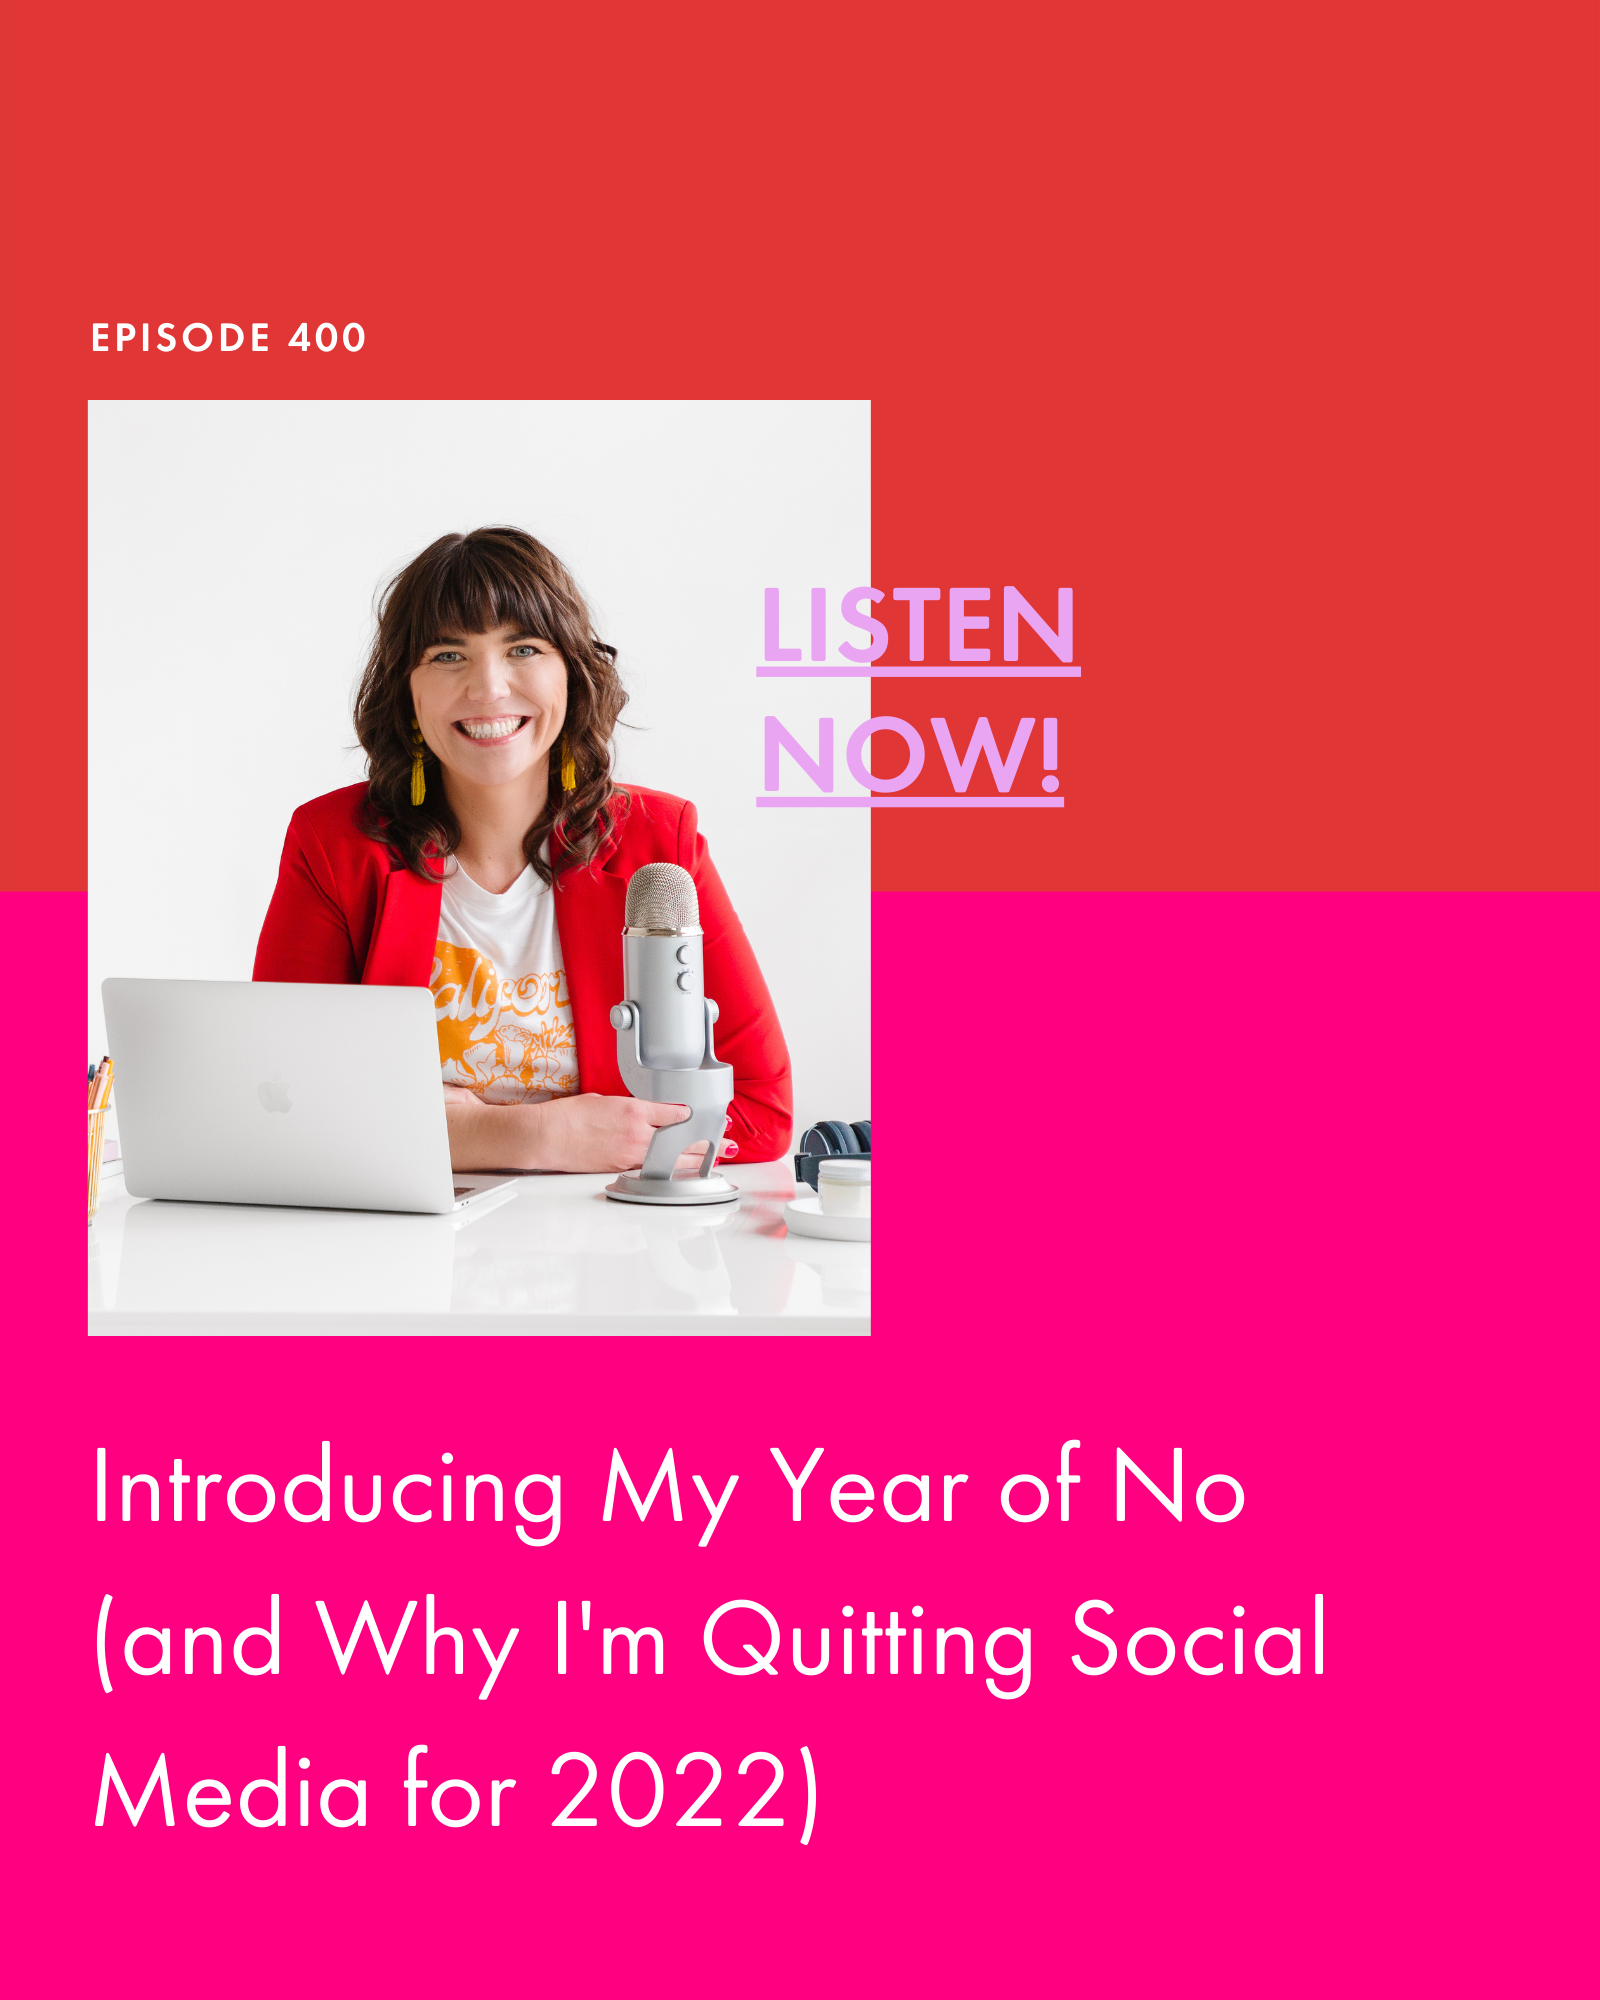 Introducing My Year of No (and Why I'm Quitting Social Media for 2022)